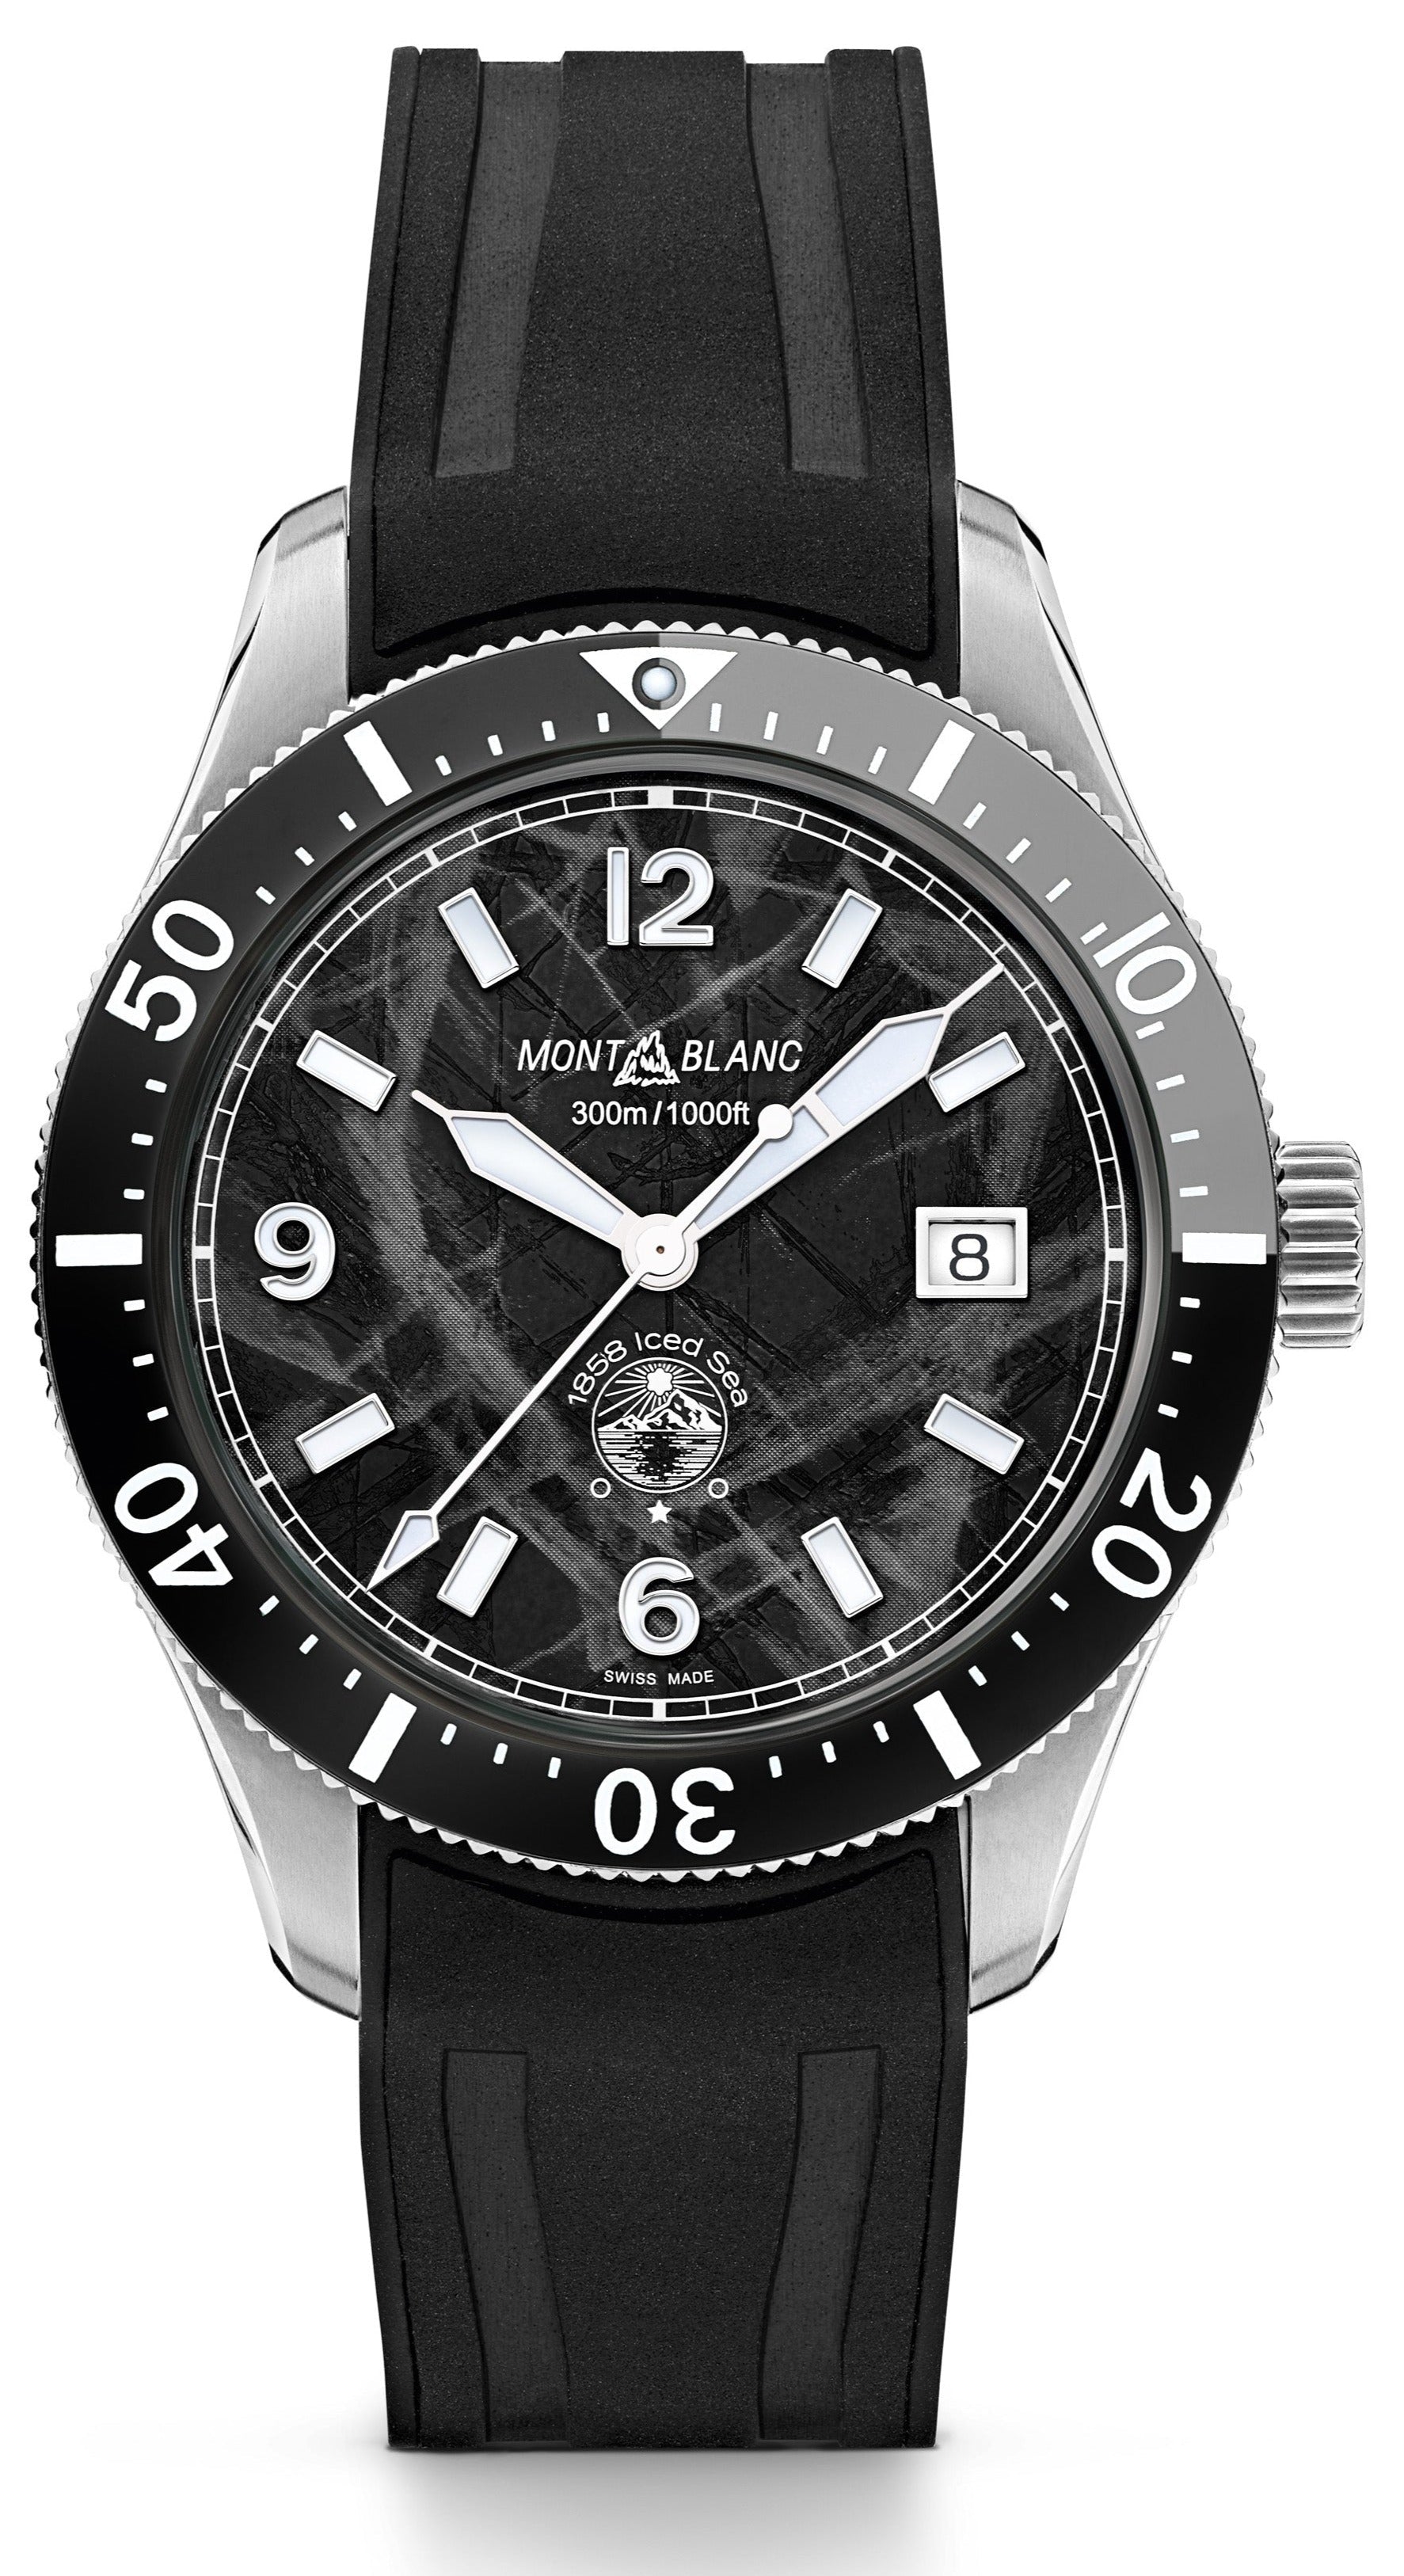 Photos - Wrist Watch Mont Blanc Montblanc Watch Iced Sea Automatic Date - Black MNTB-172 